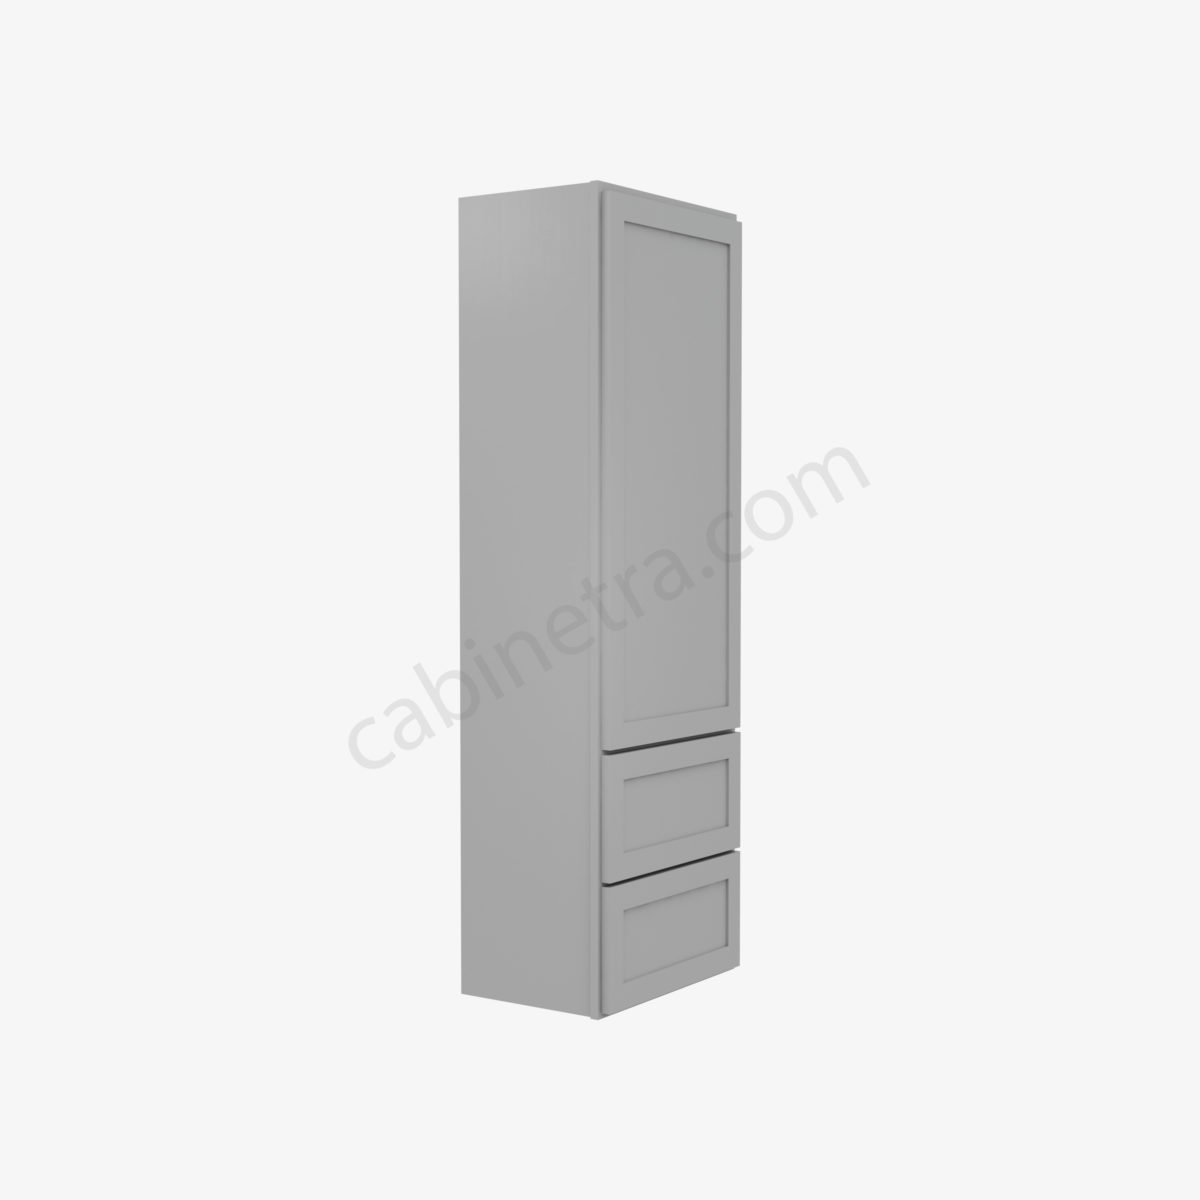 AB W2D1860 4 Forevermark Lait Gray Shaker Cabinetra scaled